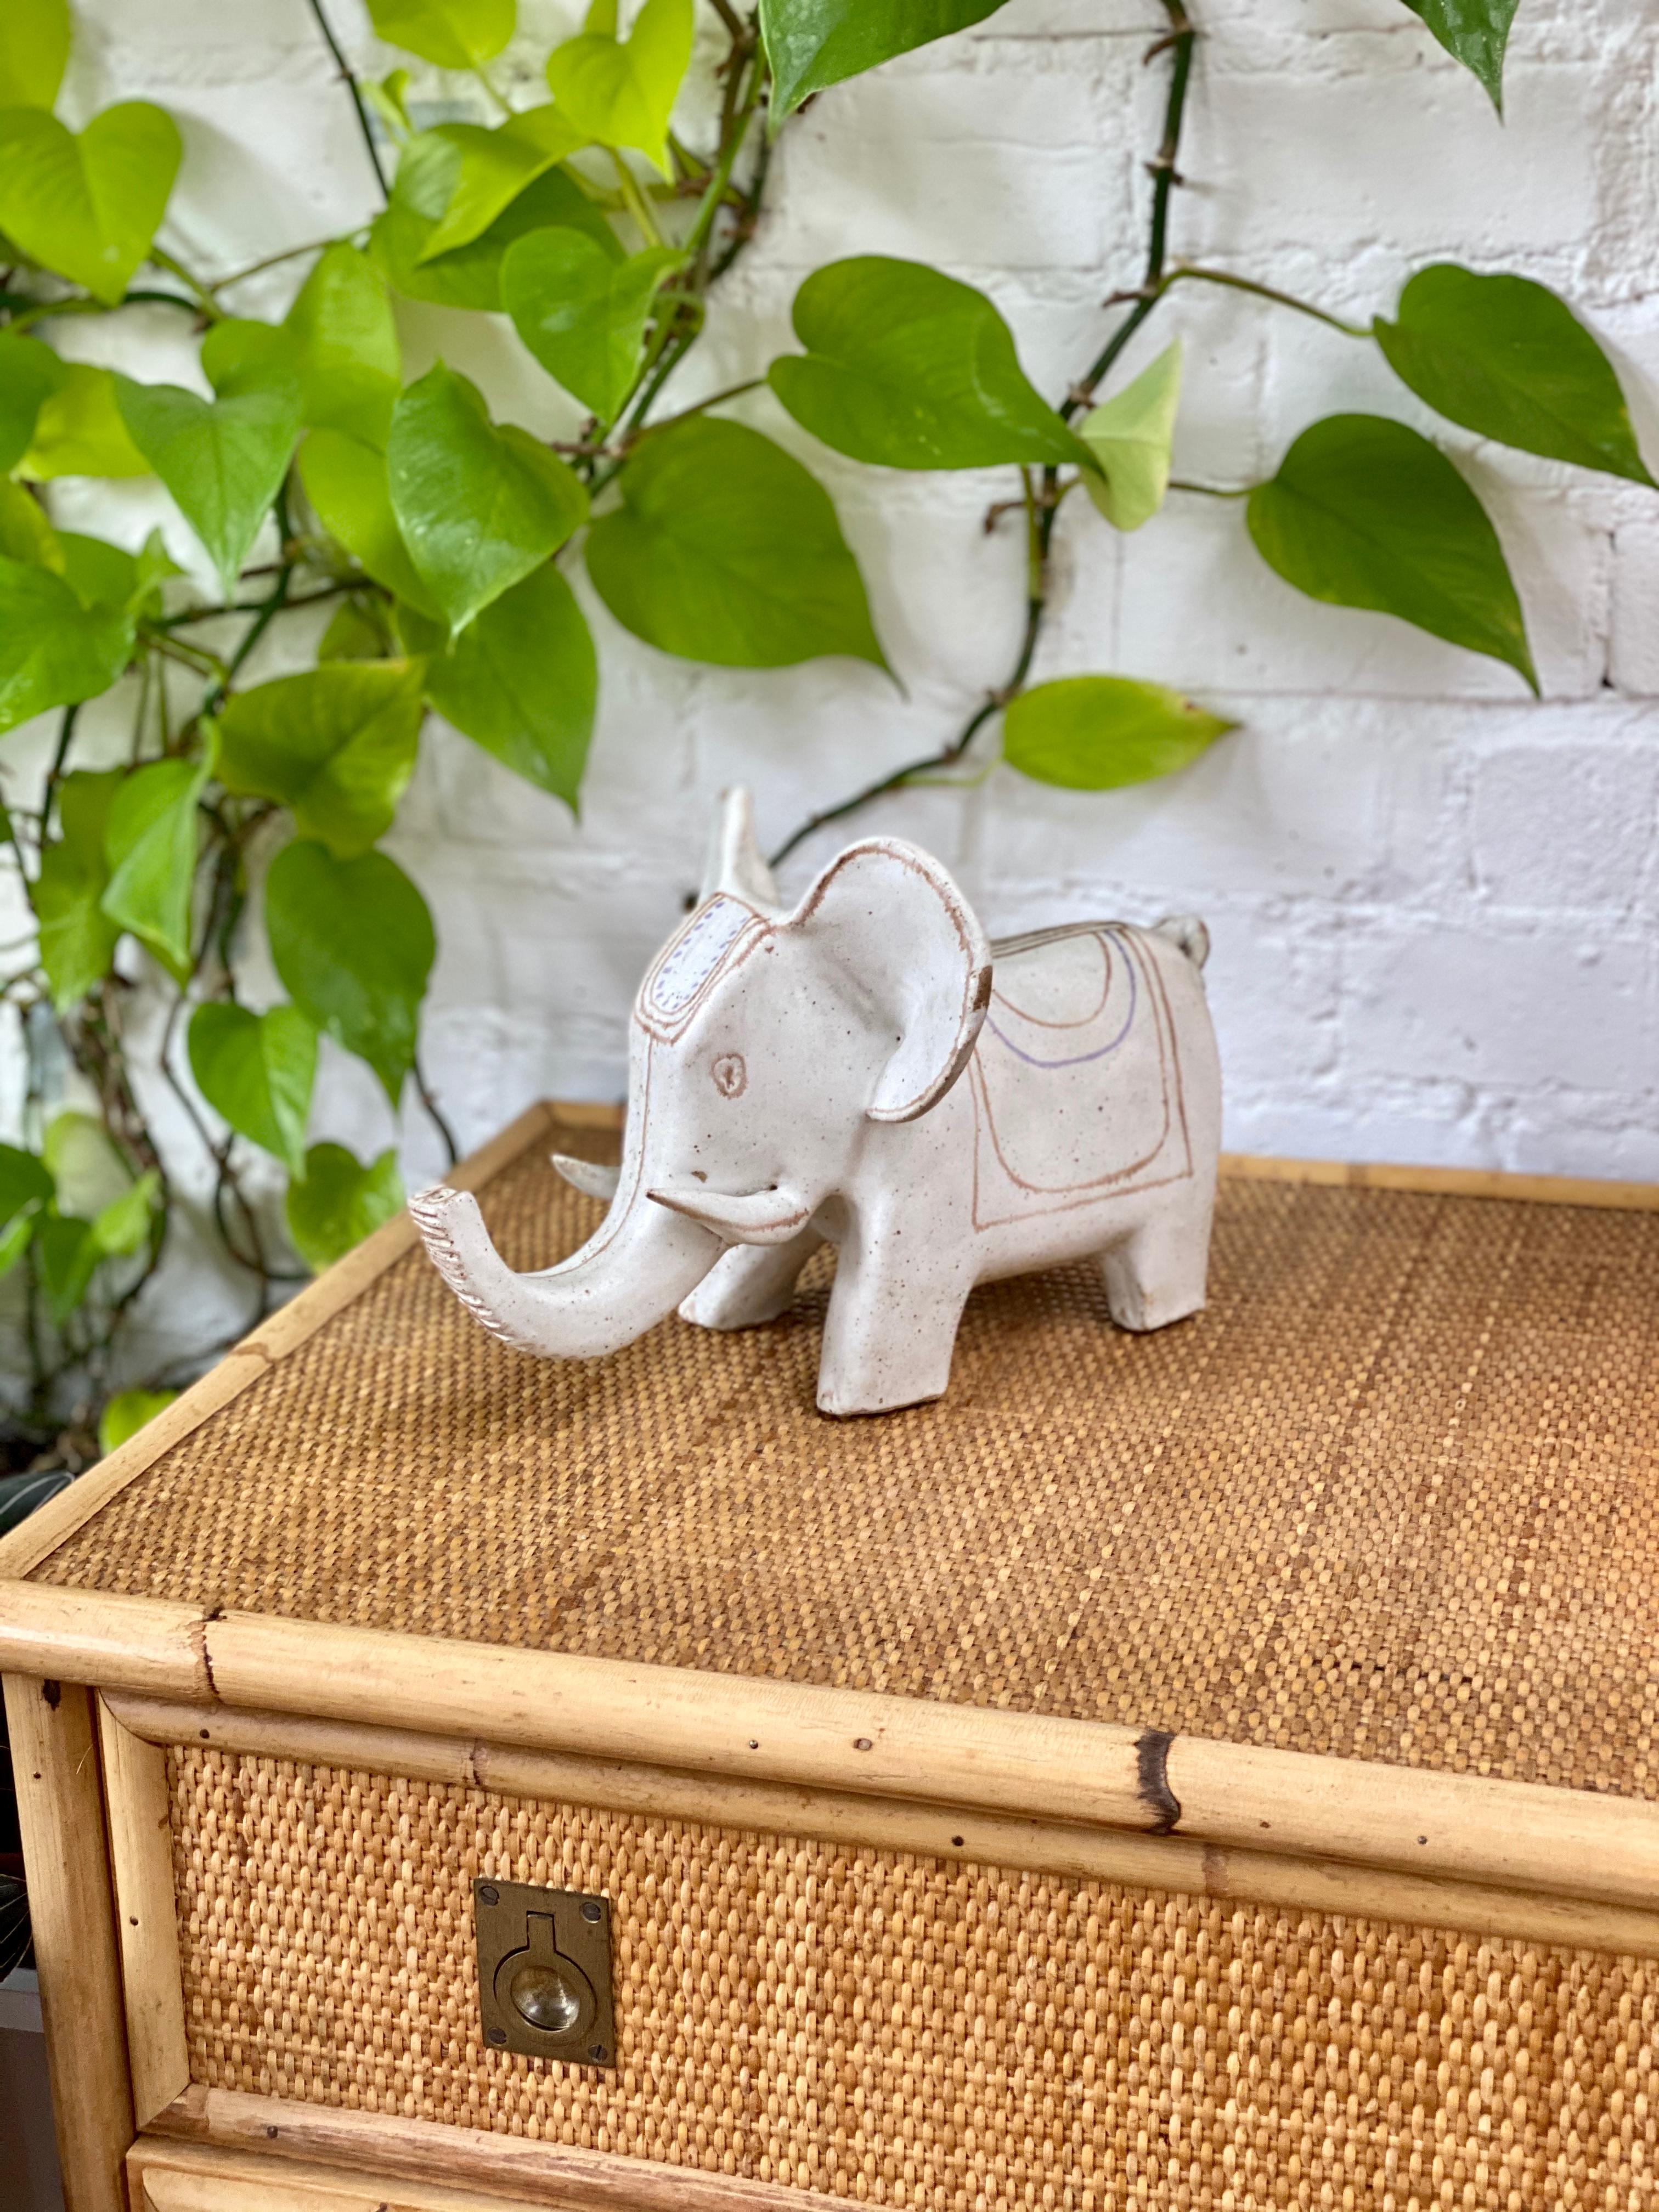 Ceramic Indian motif white elephant by Bruno Gambone (circa 1970s). This is an absolutely charming ceramic white elephant with an Indian-style blanket and headdress, large whimsical ears and tusks in Gambone's signature chalk-white. Light brown and